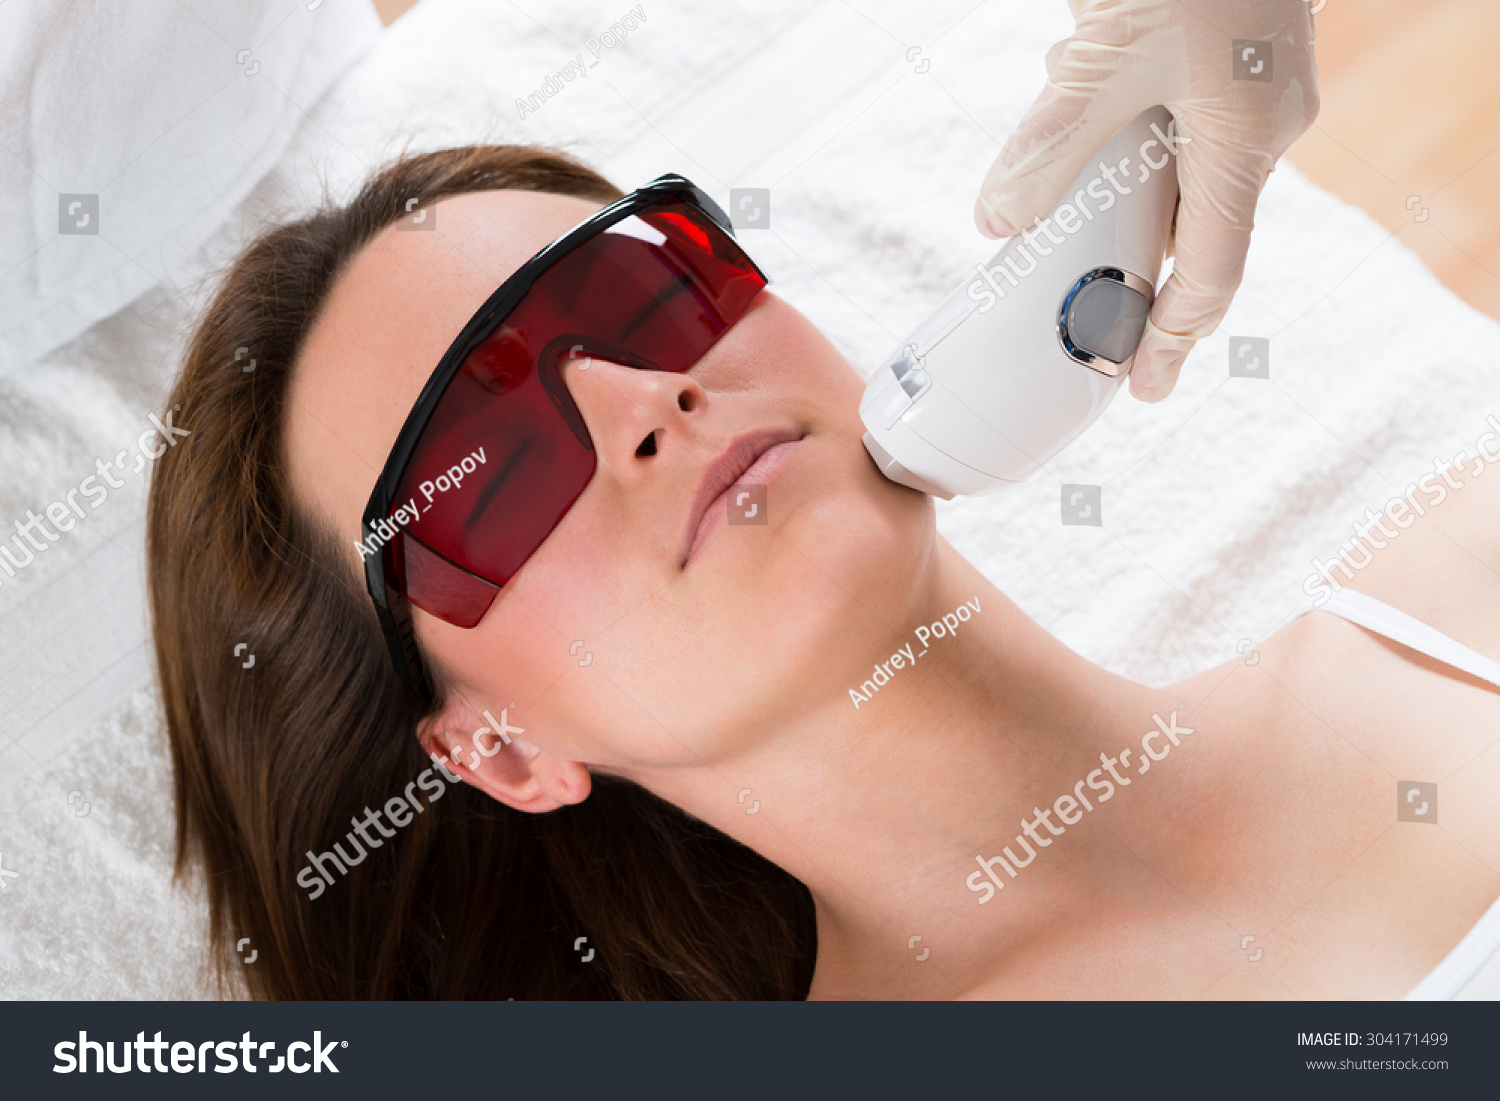 Young Woman Receiving Epilation Laser Treatment On Face At Beauty Center #304171499